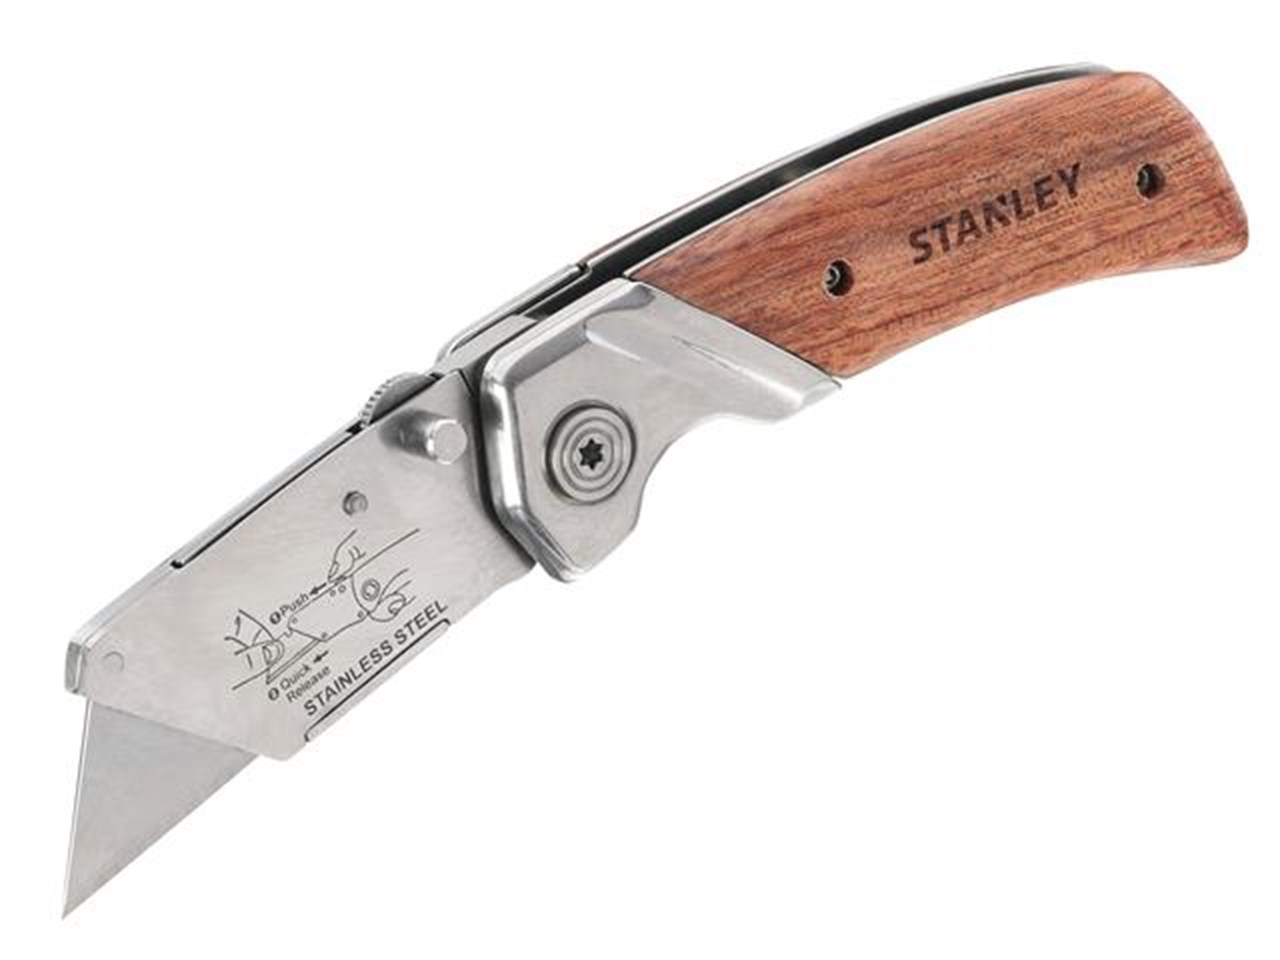 Stanley woodworking knife Main Image